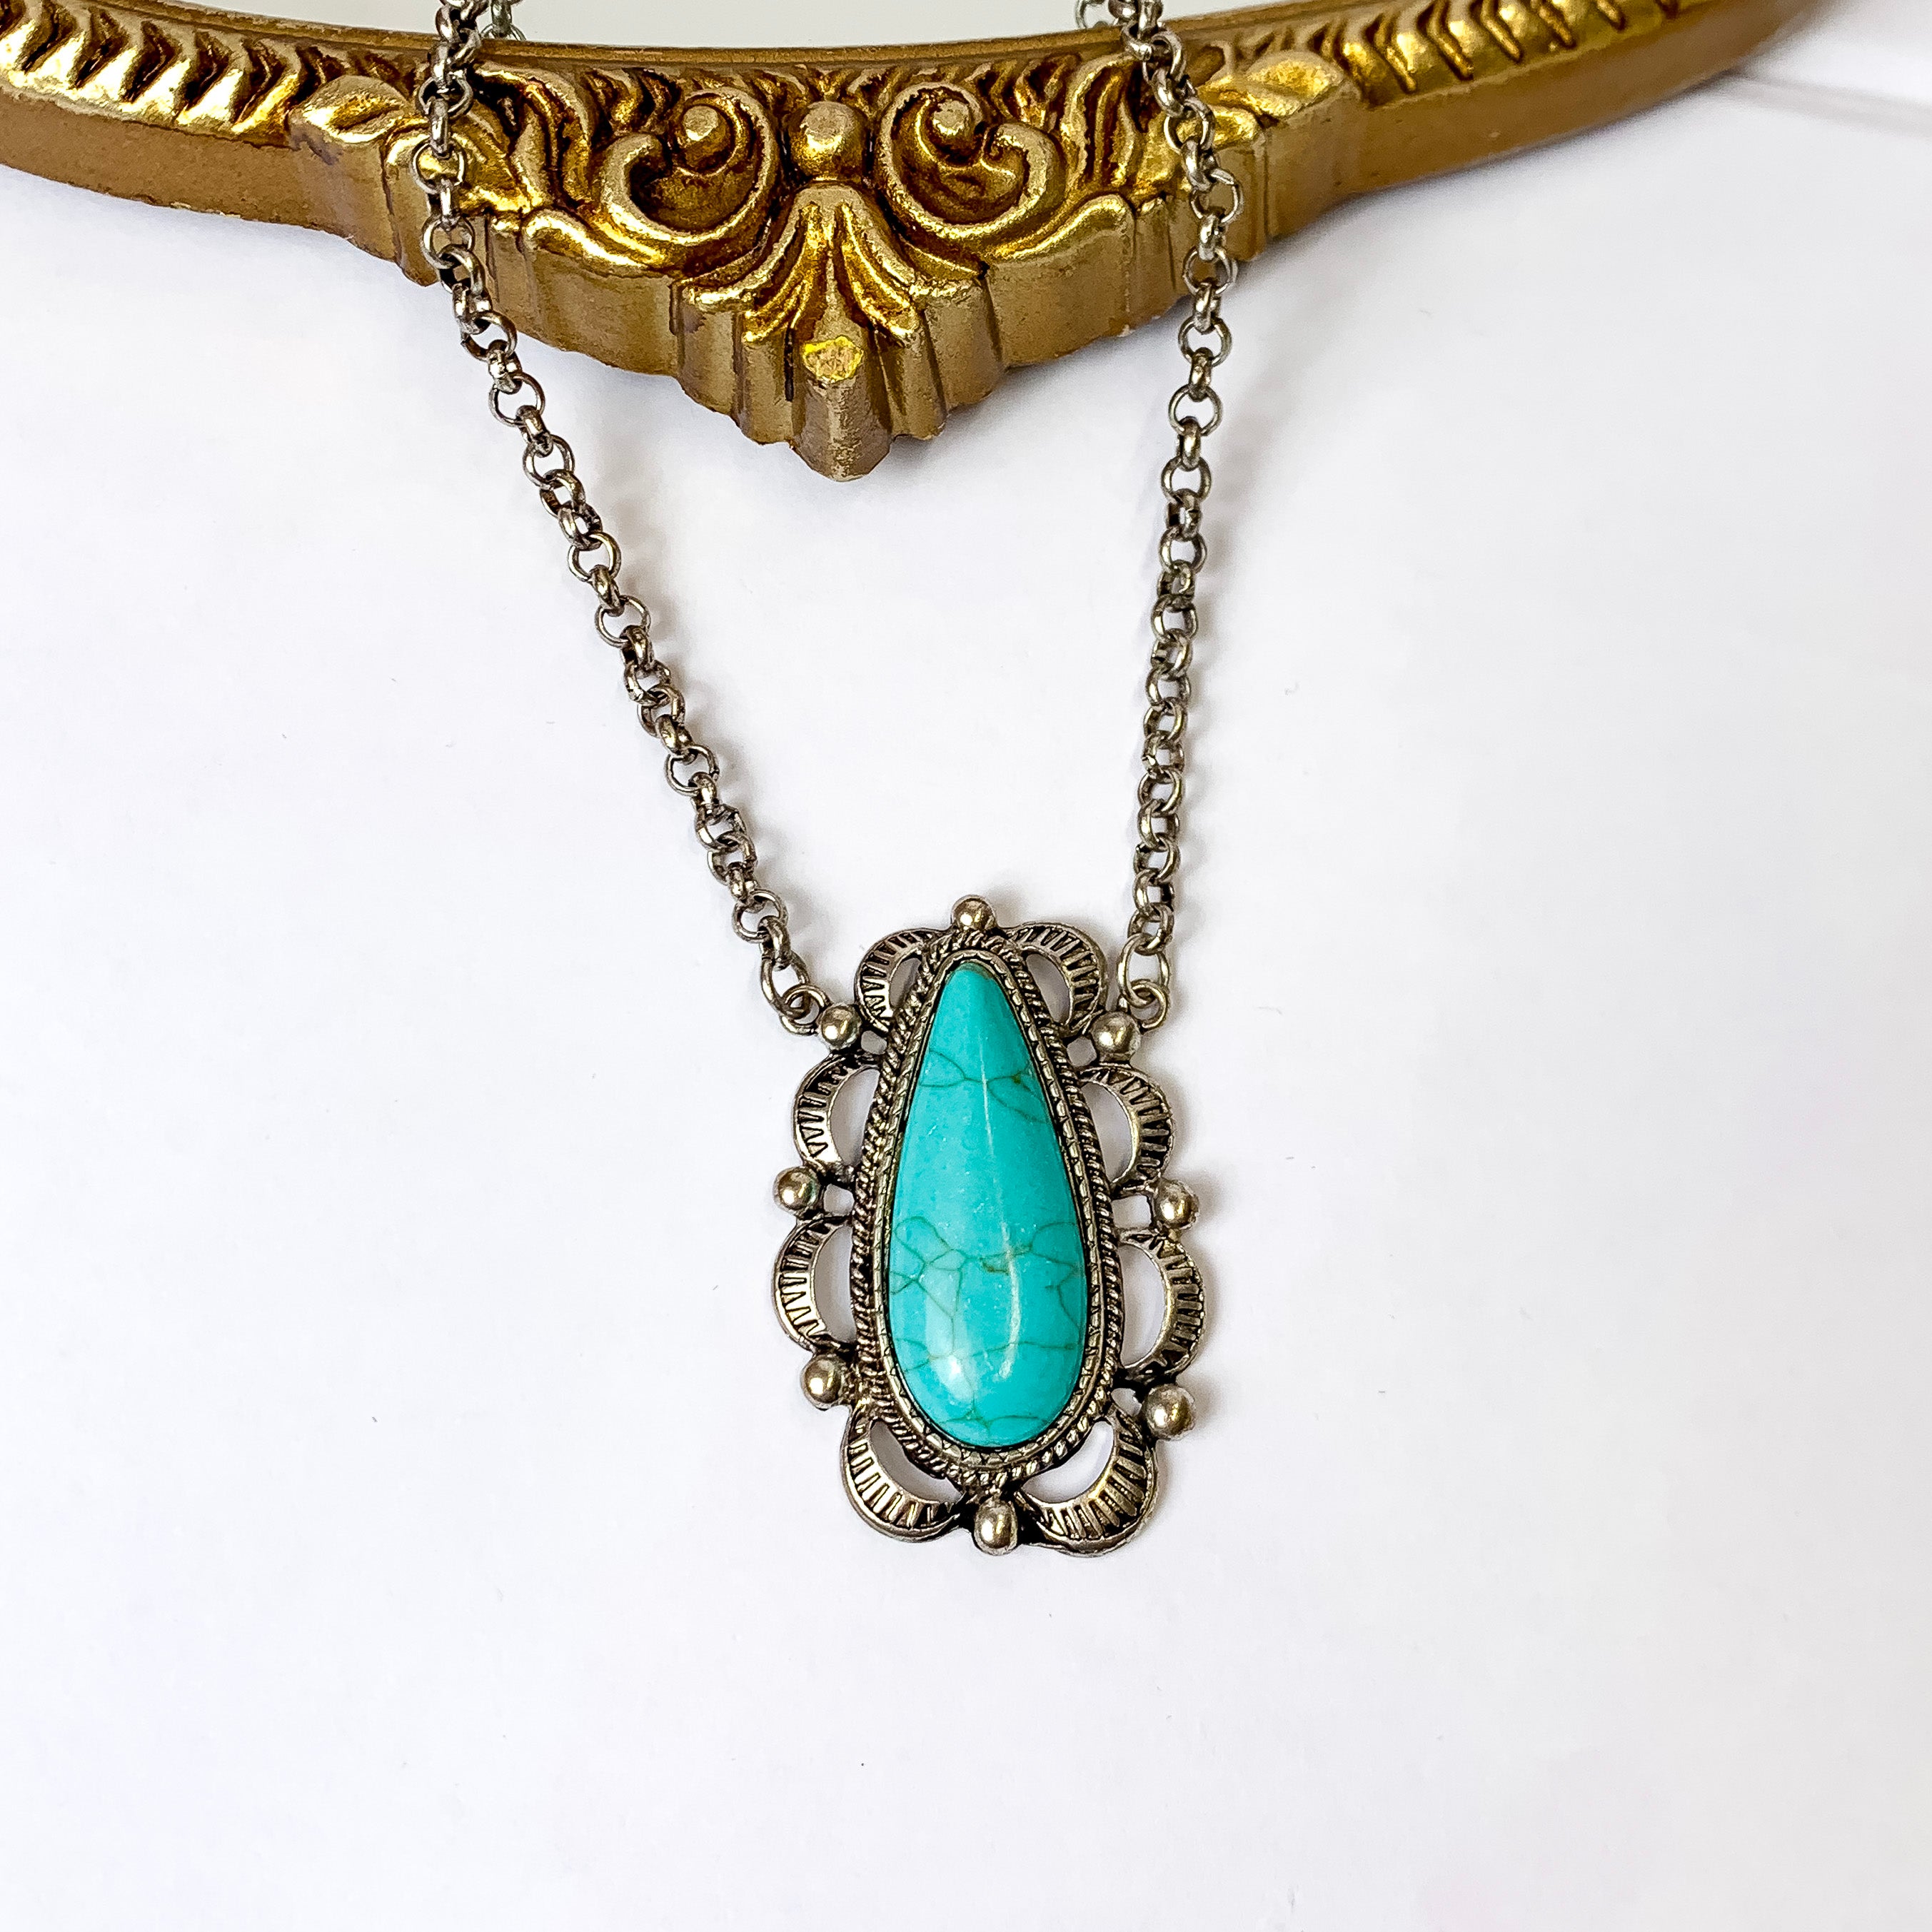 Western Silver Tone Chain Necklace with Ornate Teardrop Pendant in Turquoise - Giddy Up Glamour Boutique